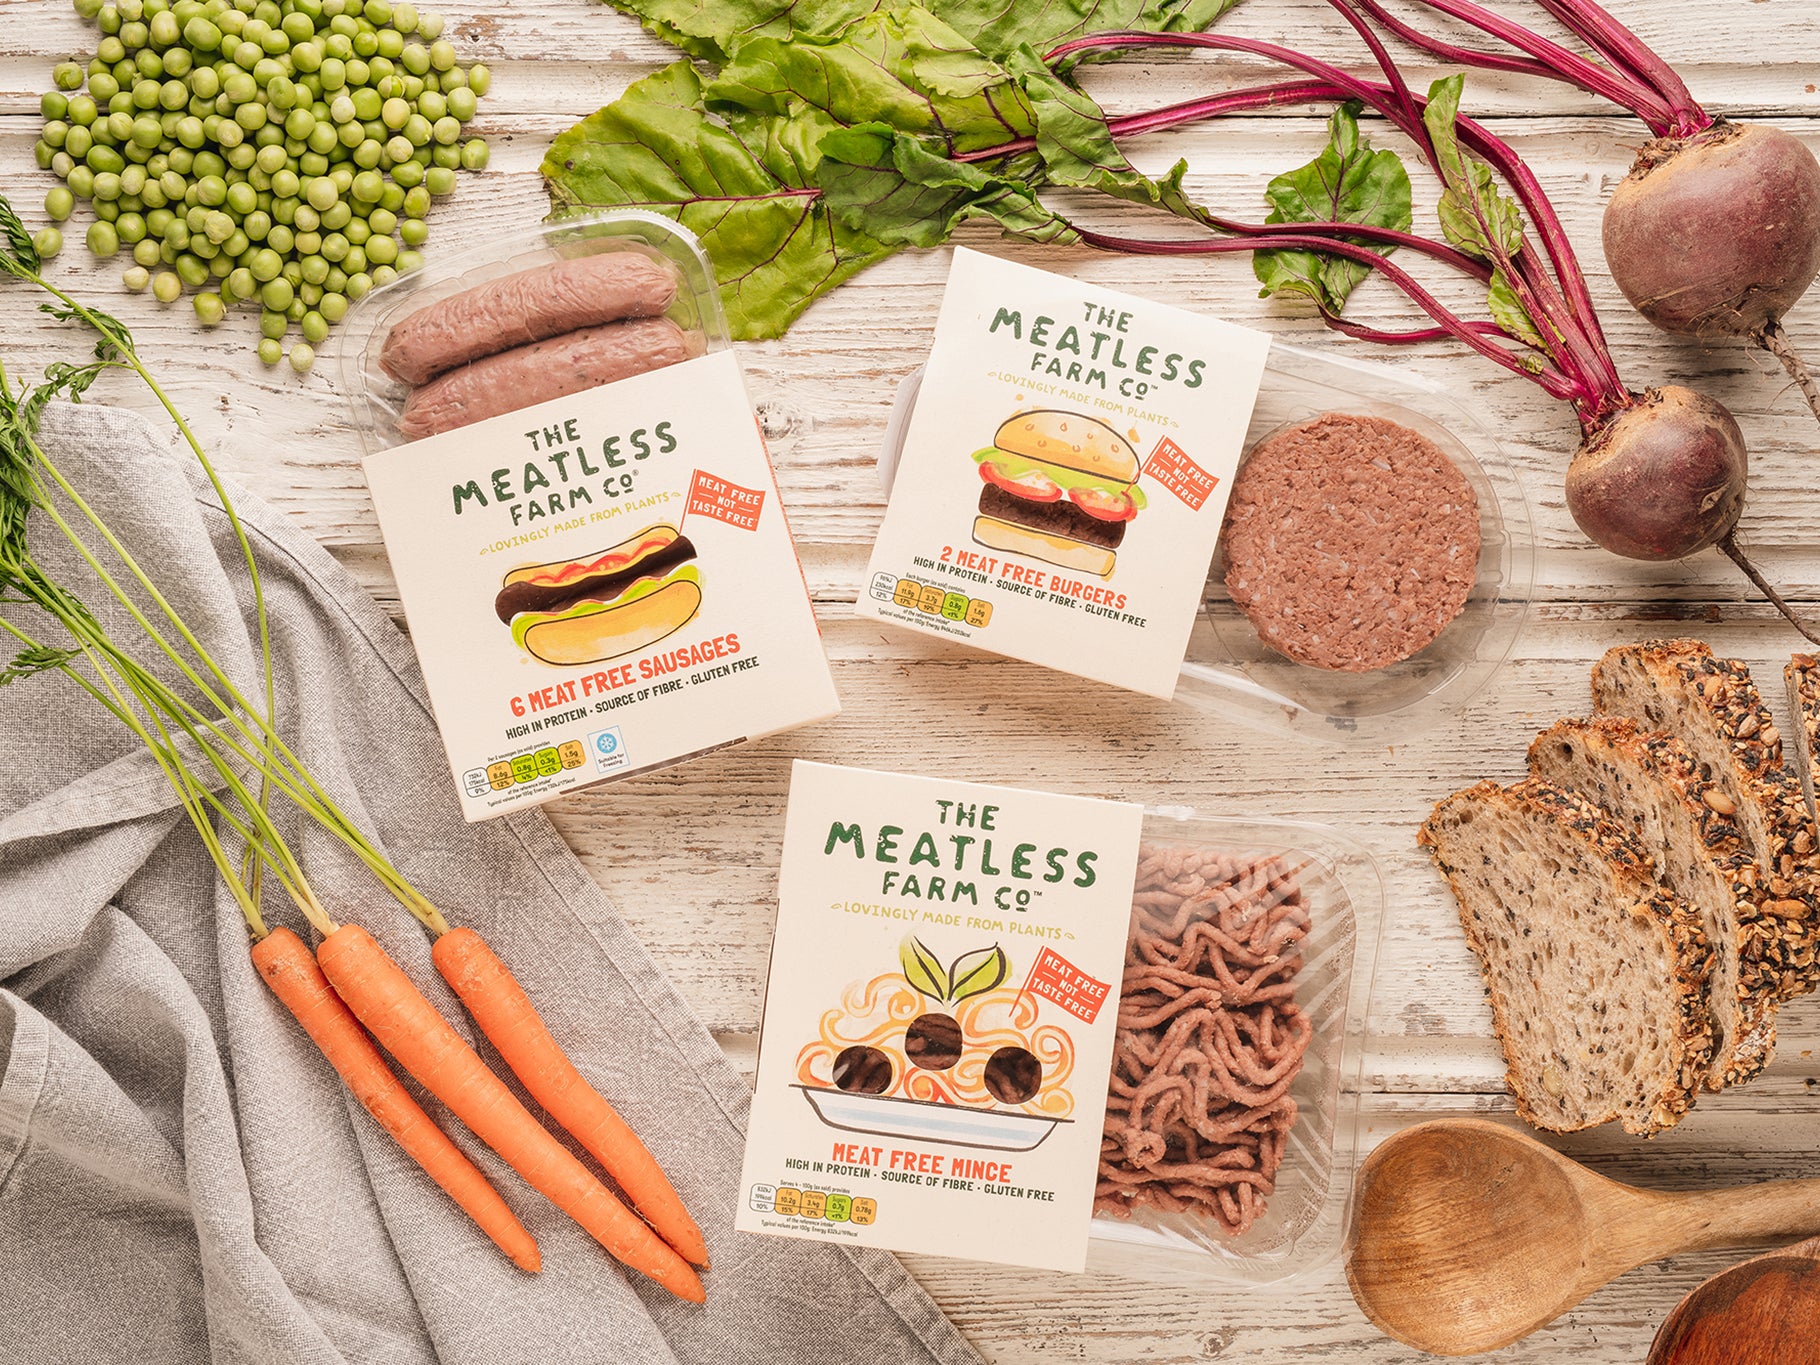 Since its launch in 2016, Meatless Farm has secured distribution deals in all four major UK supermarket chains